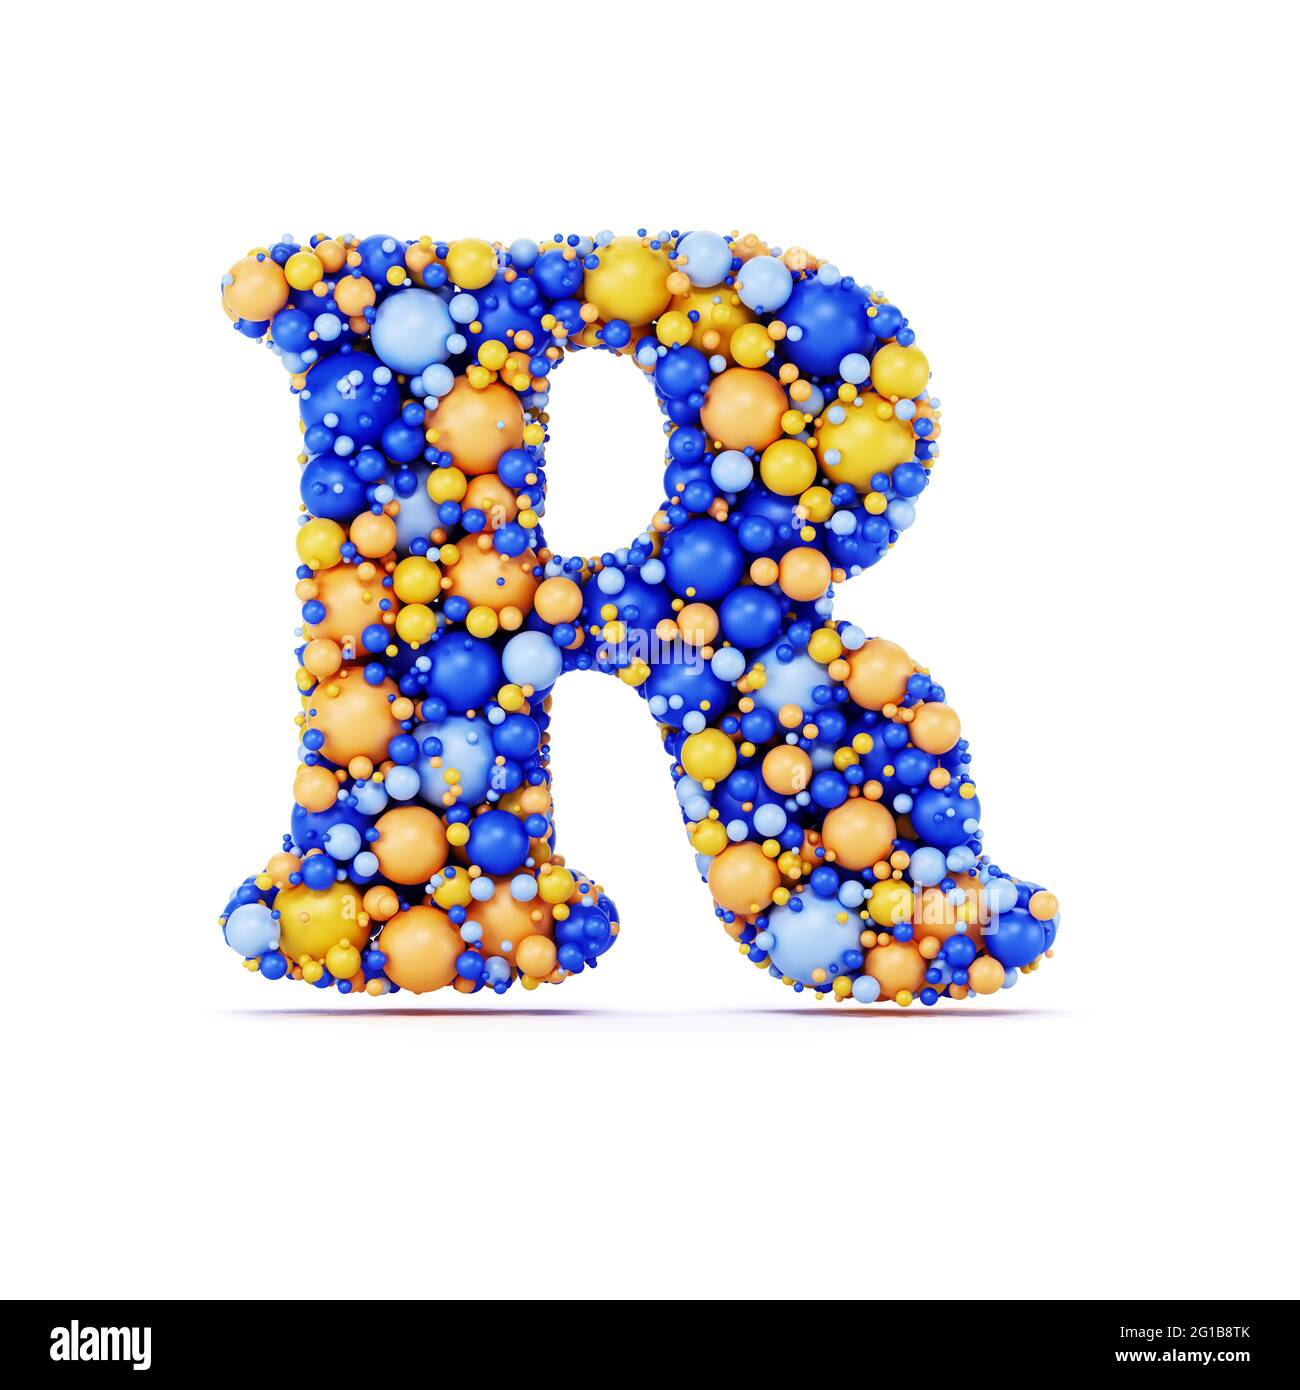 R letter with colored shiny balls. Realistic 3d rendering illustration. Isolated on white background with shadow cast Stock Photo